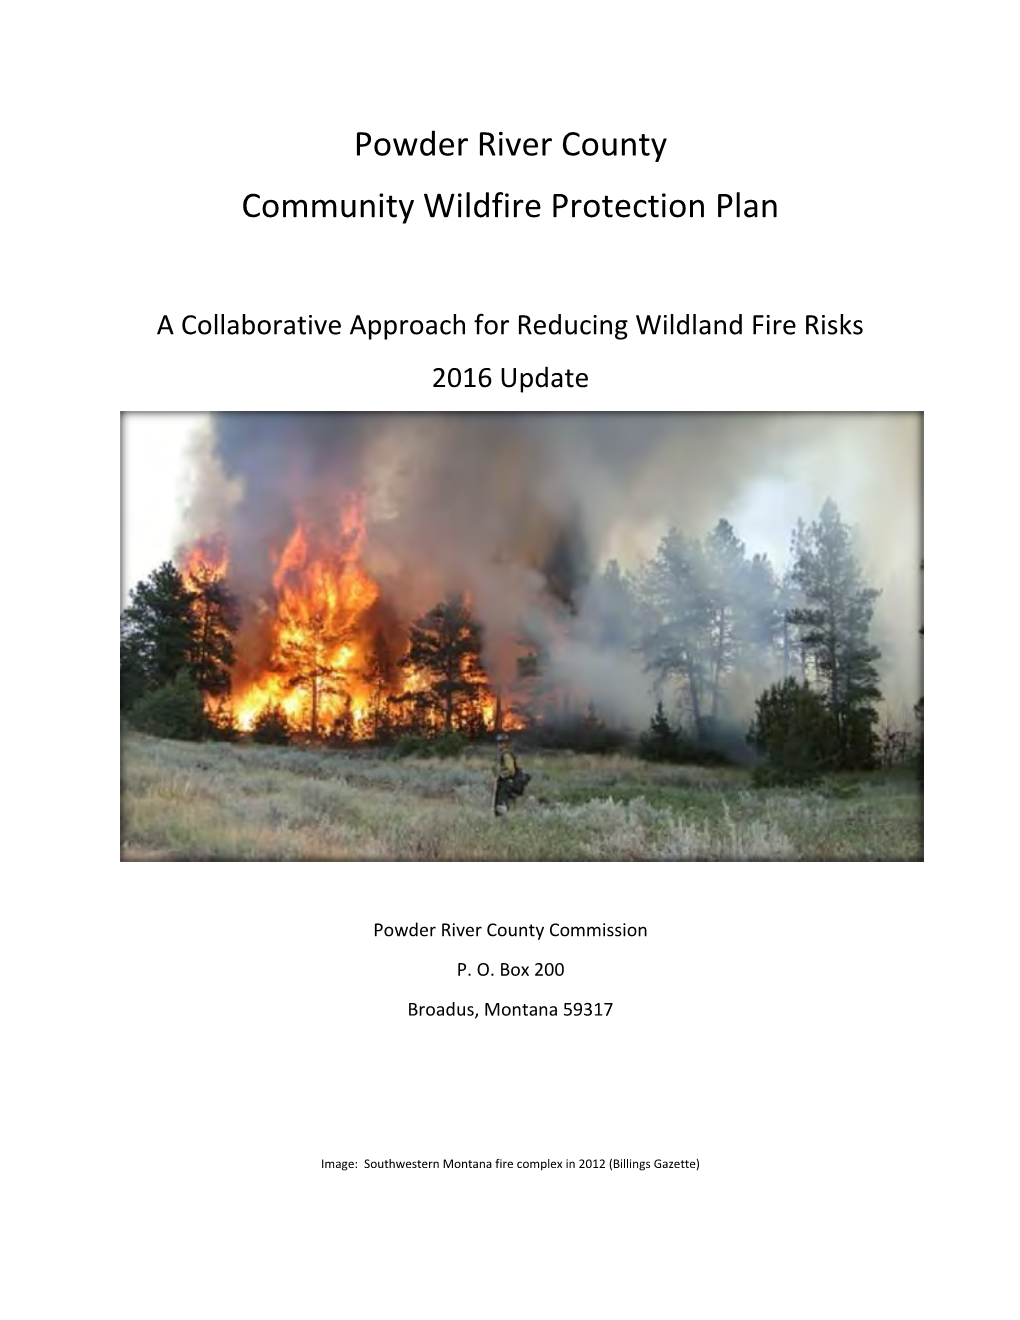 Powder River County Community Wildfire Protection Plan